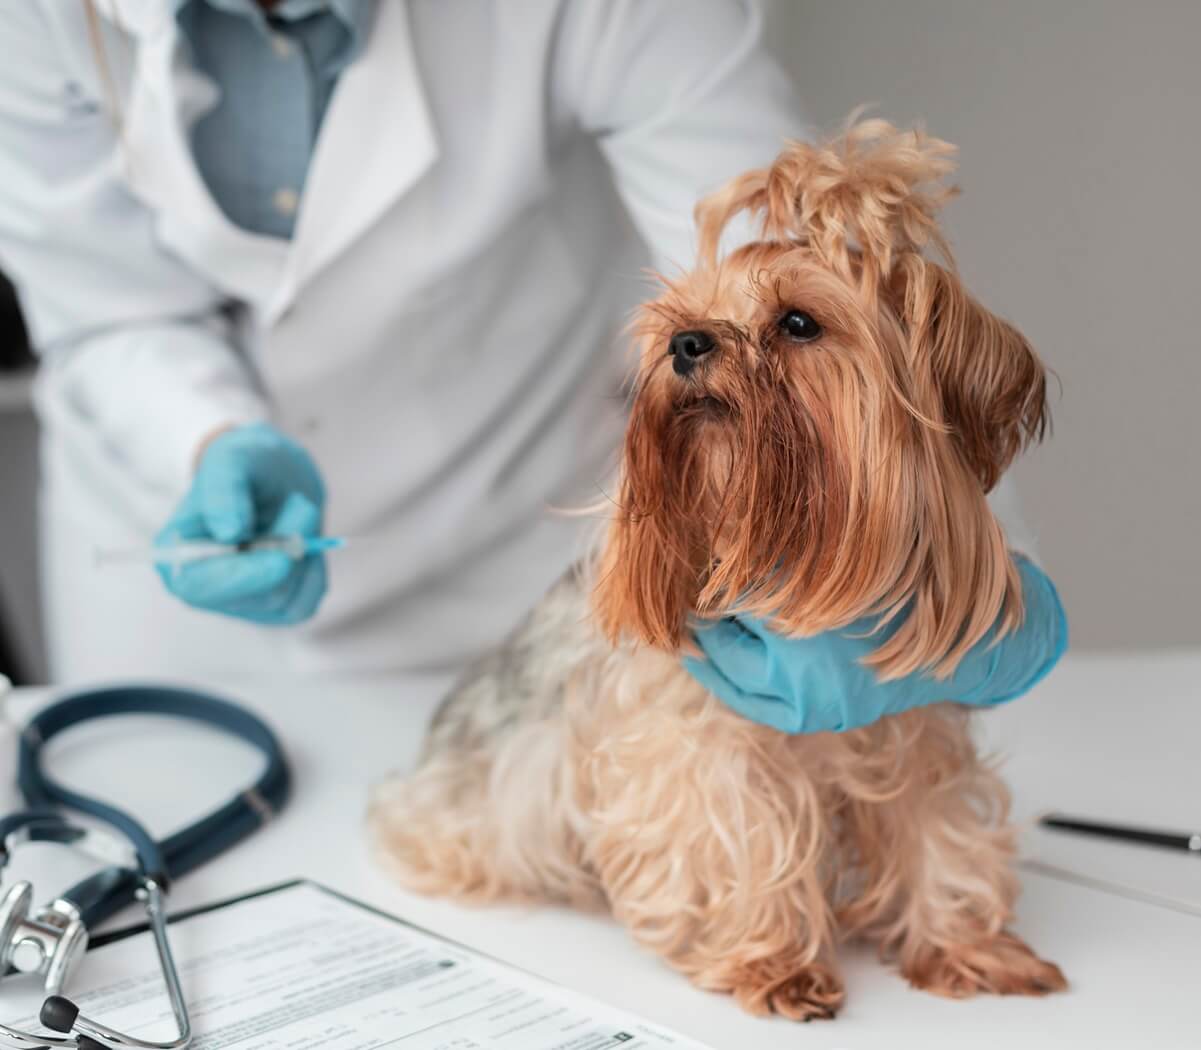 A dog being vaccinated by a vet